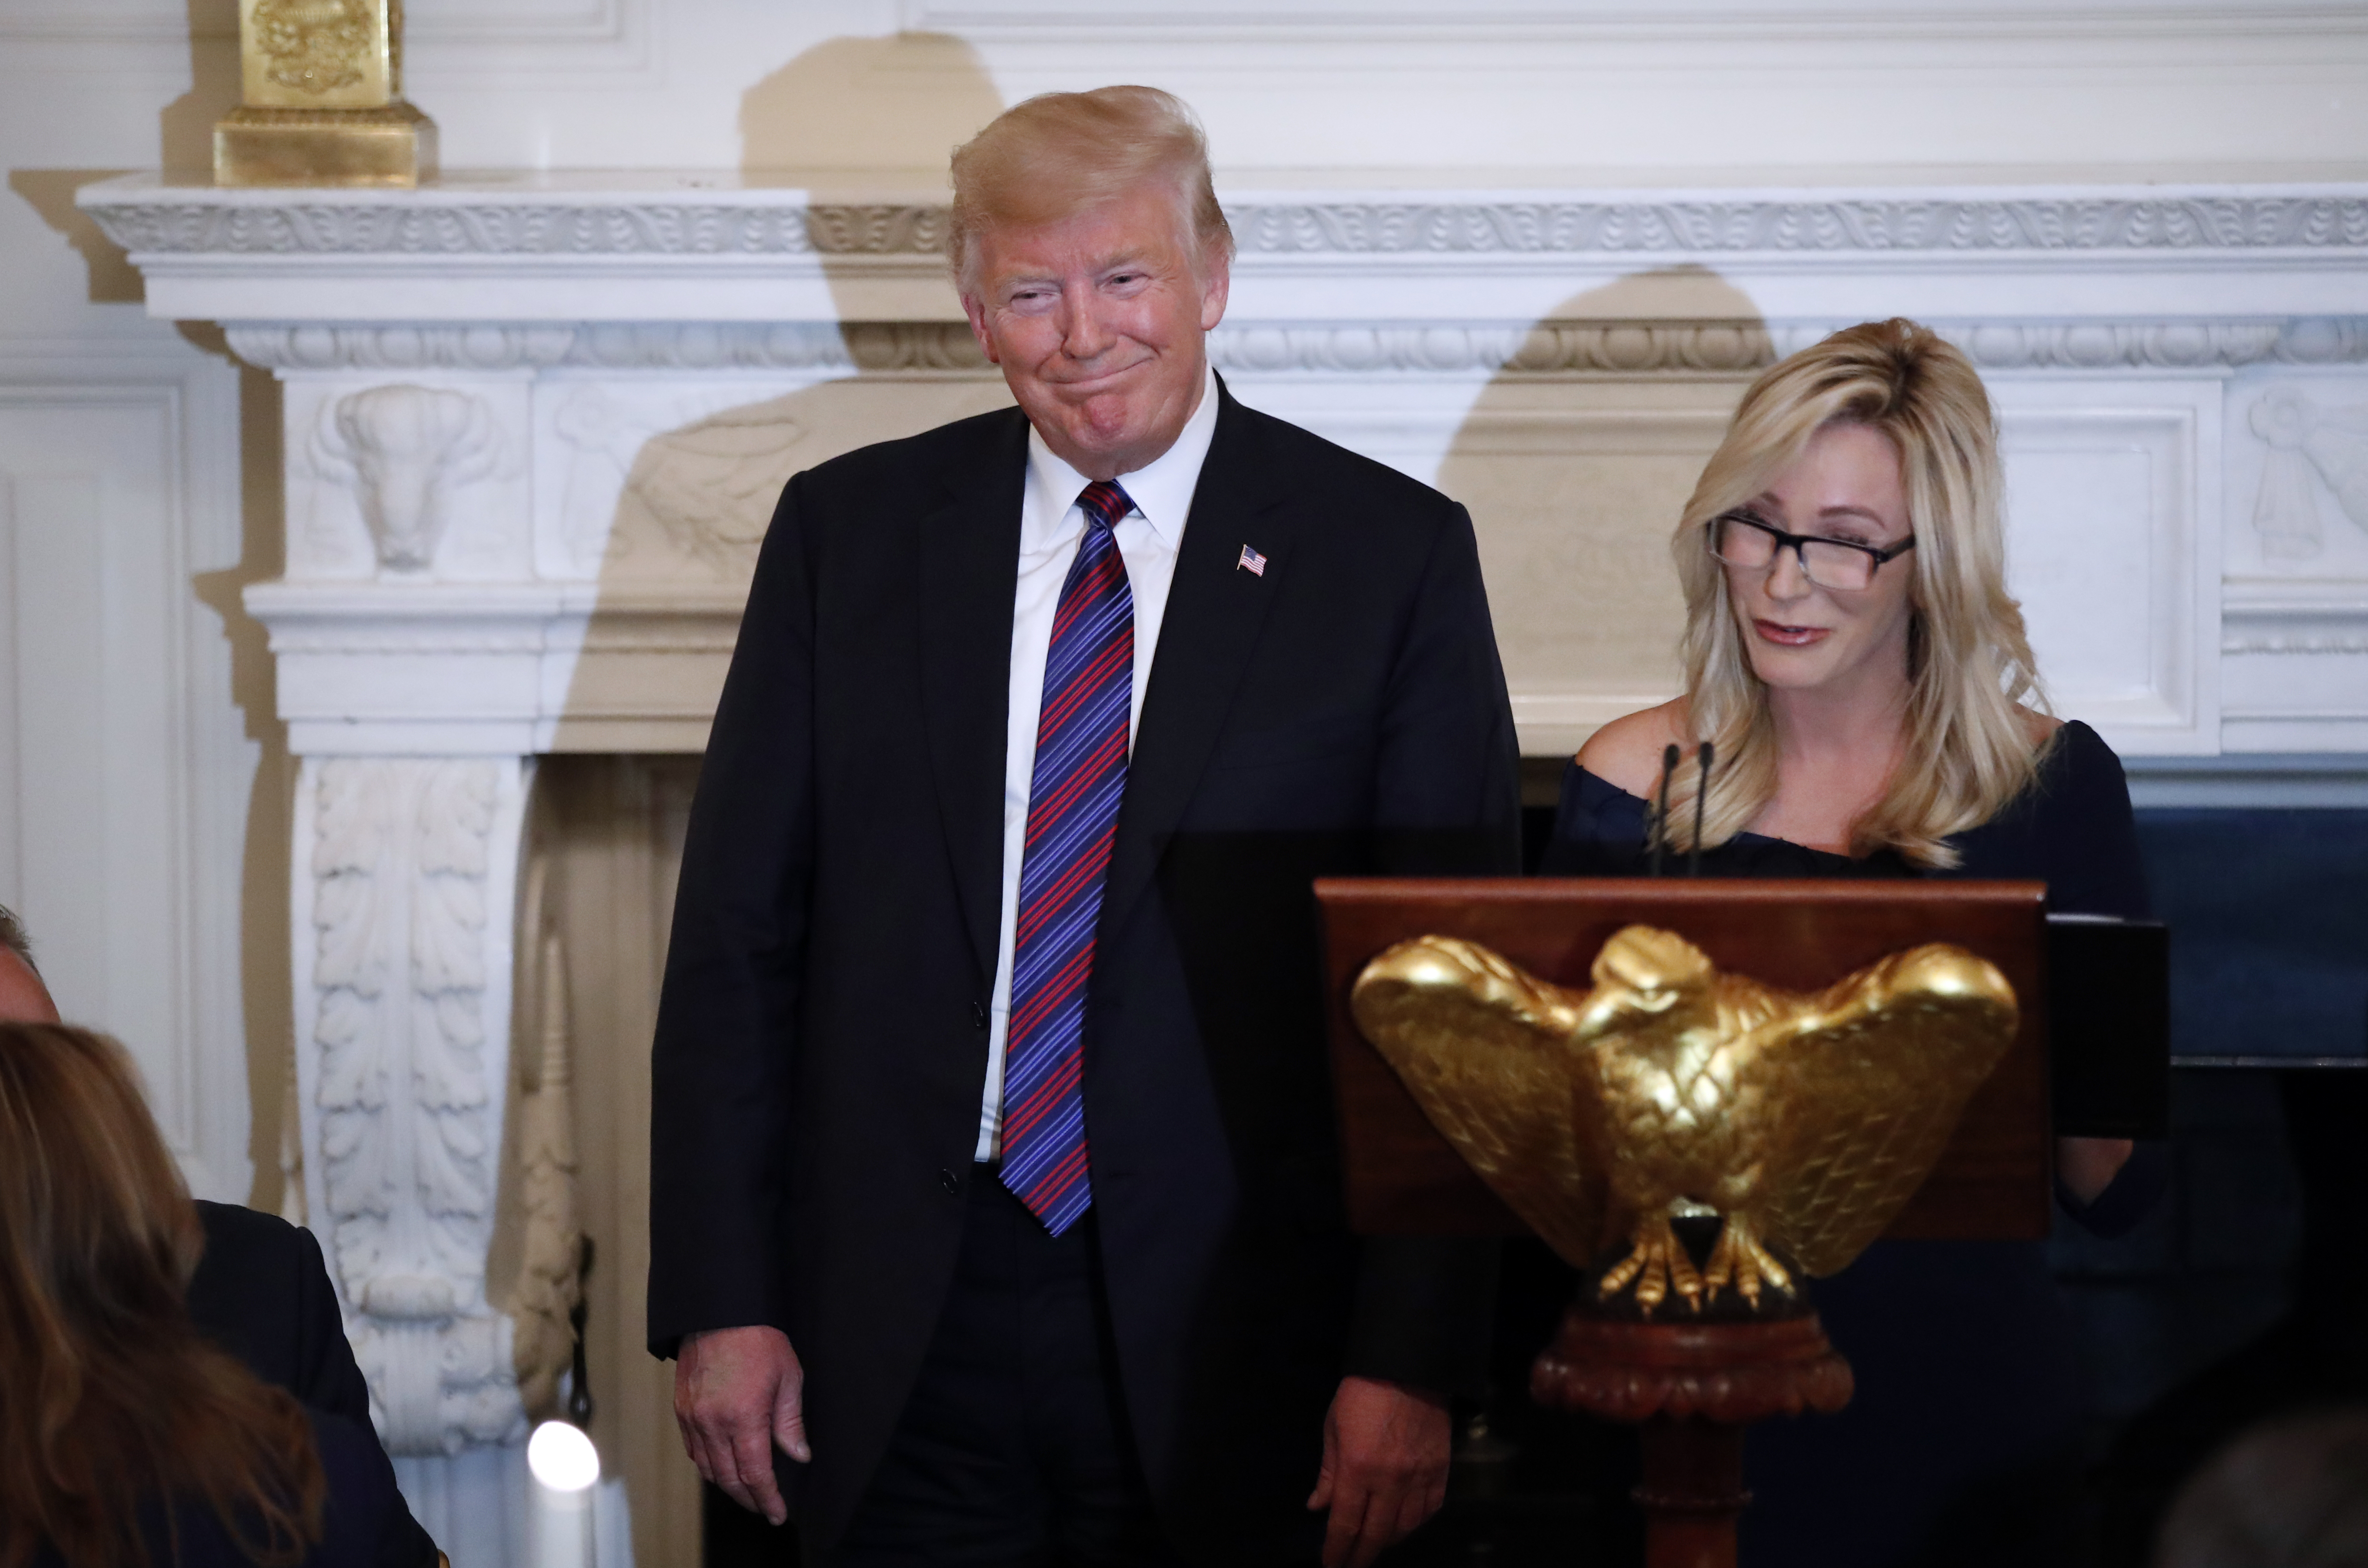 Then-President Donald Trump with pastor Paula White at a dinner for evangelical leaders in the State Dining Room of the White House, Aug. 27, 2018, in Washington. (AP/Alex Brandon)